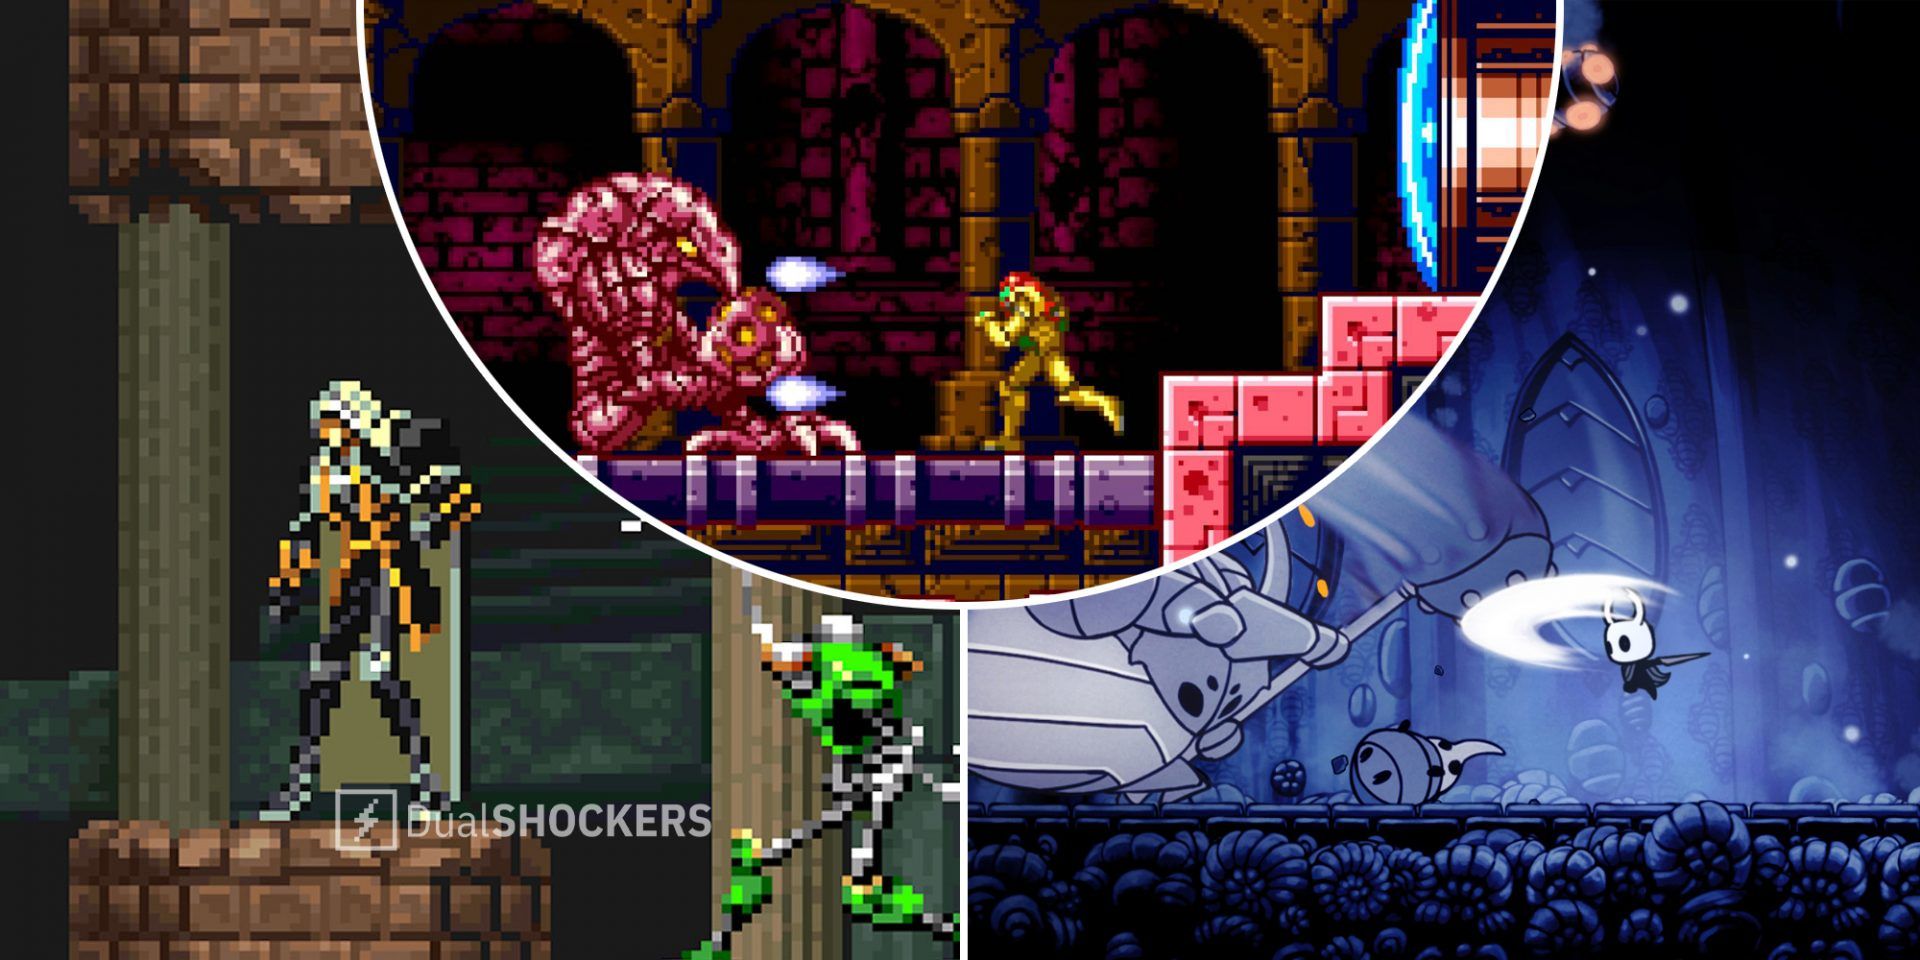 Castlevania: Symphony of the Night on left, Metroid: Zero Mission in middle, Hollow Knight on right